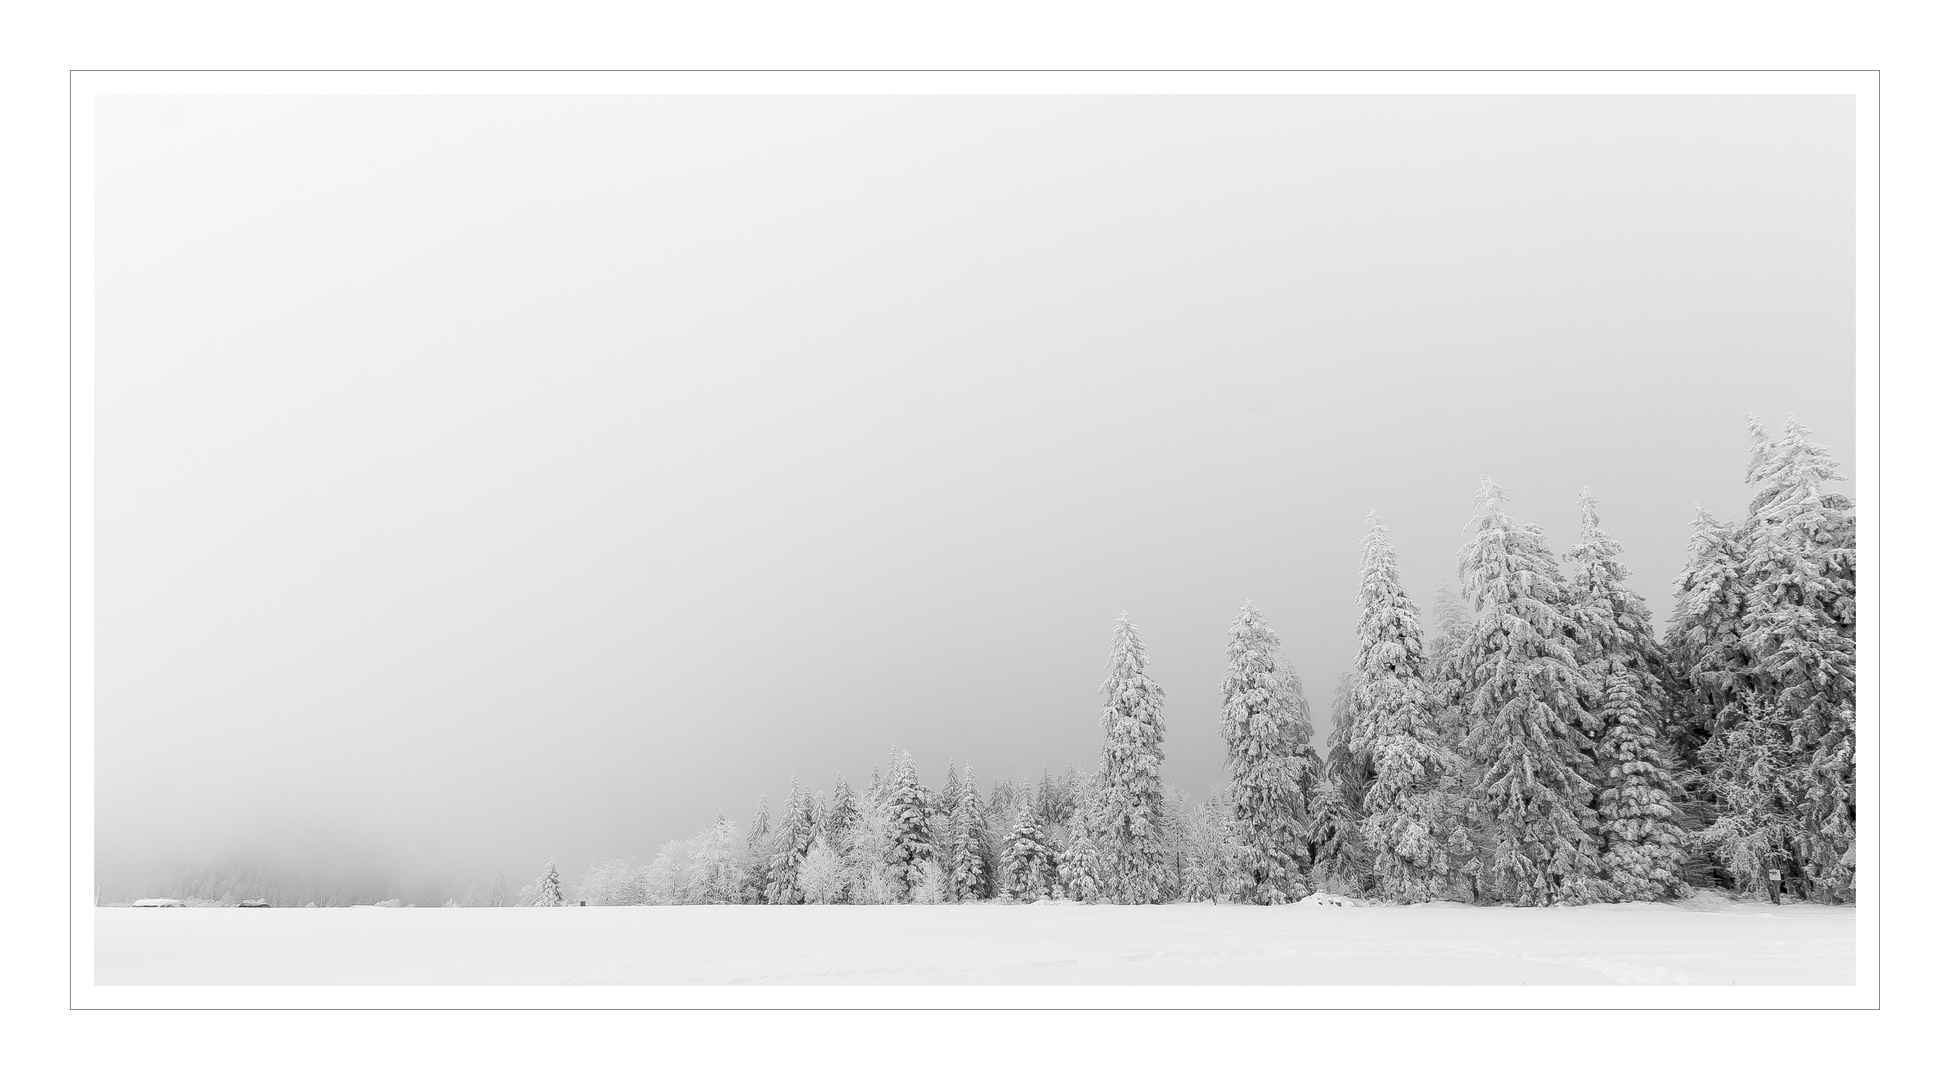 The Black Forest covered in snow